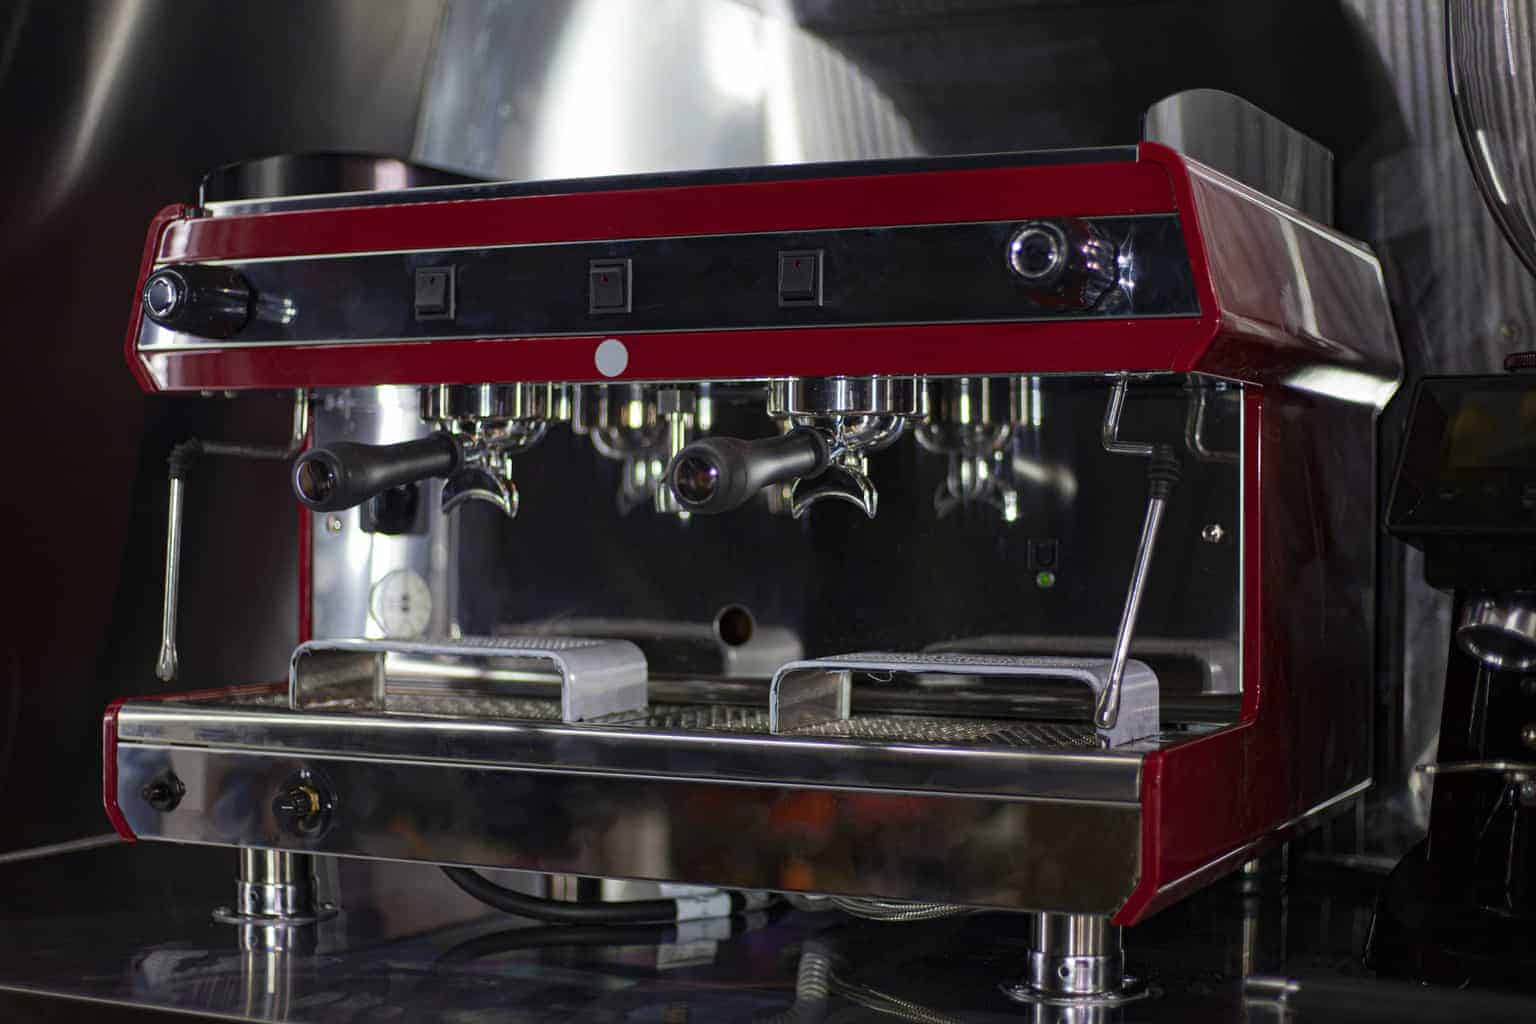 Used Espresso Machines: Is Buying One A Good Idea?